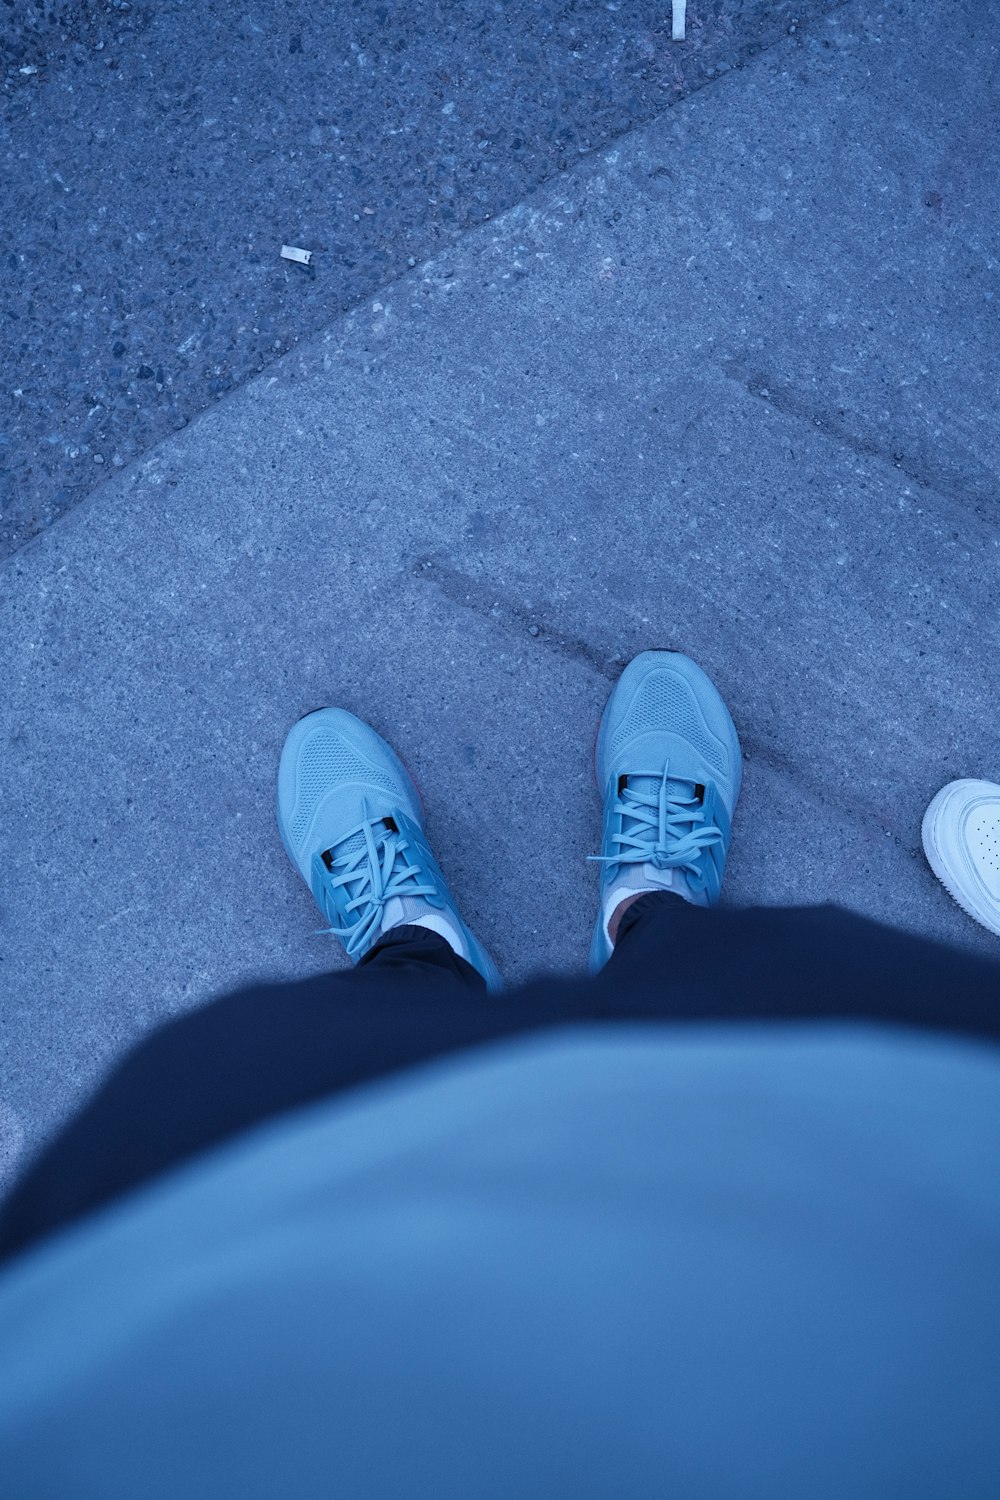 a person wearing blue shoes standing on a sidewalk